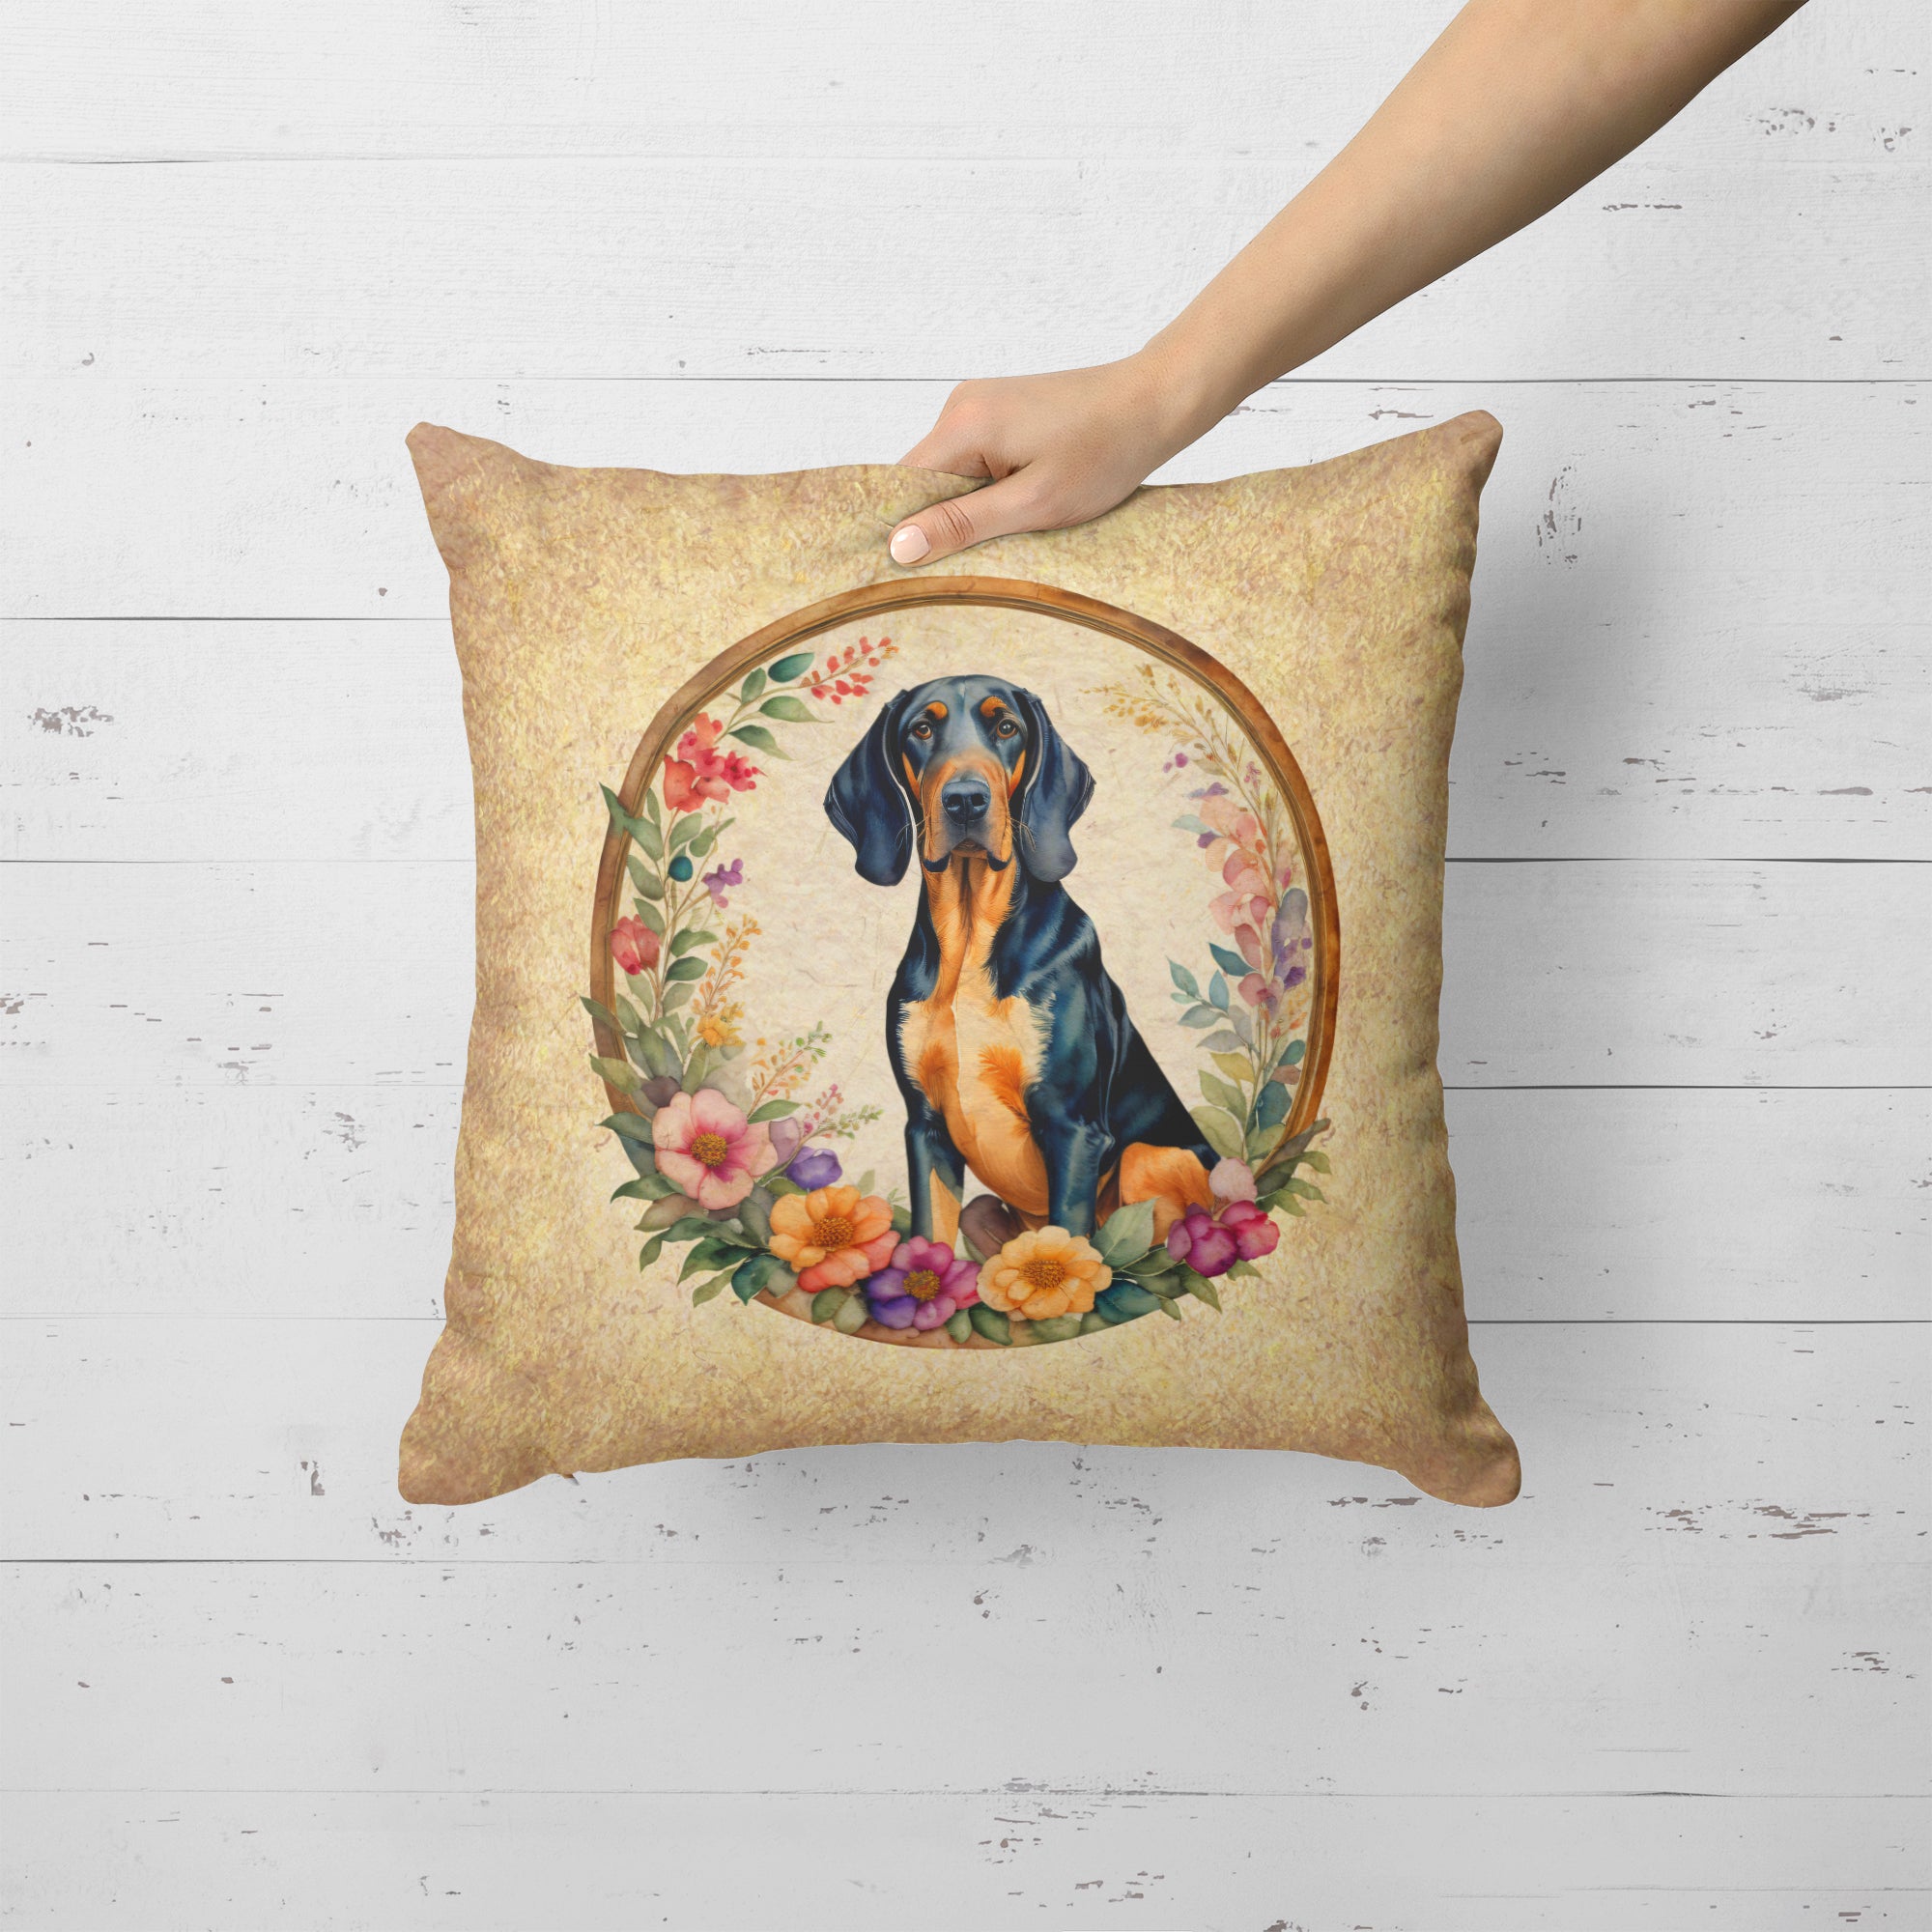 Buy this Coonhound and Flowers Fabric Decorative Pillow